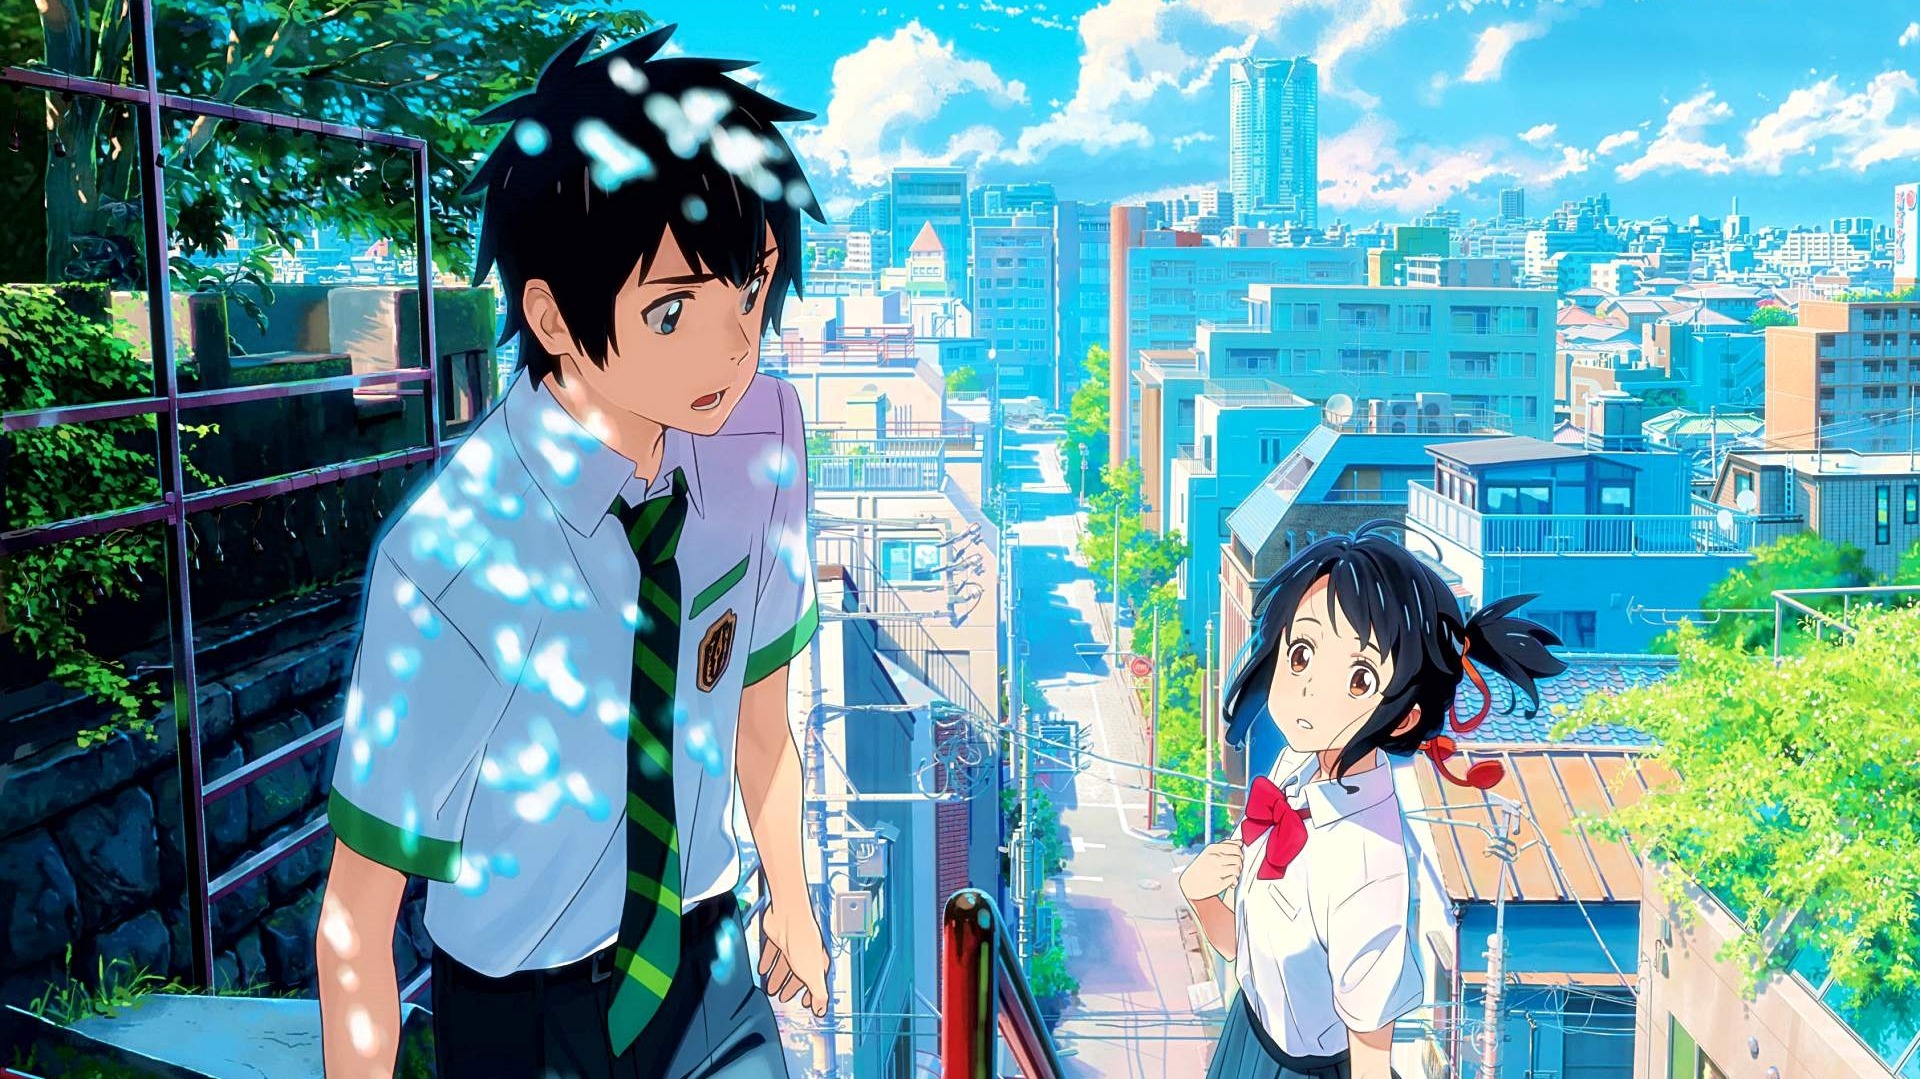 Live-Action Your Name Lands New Director